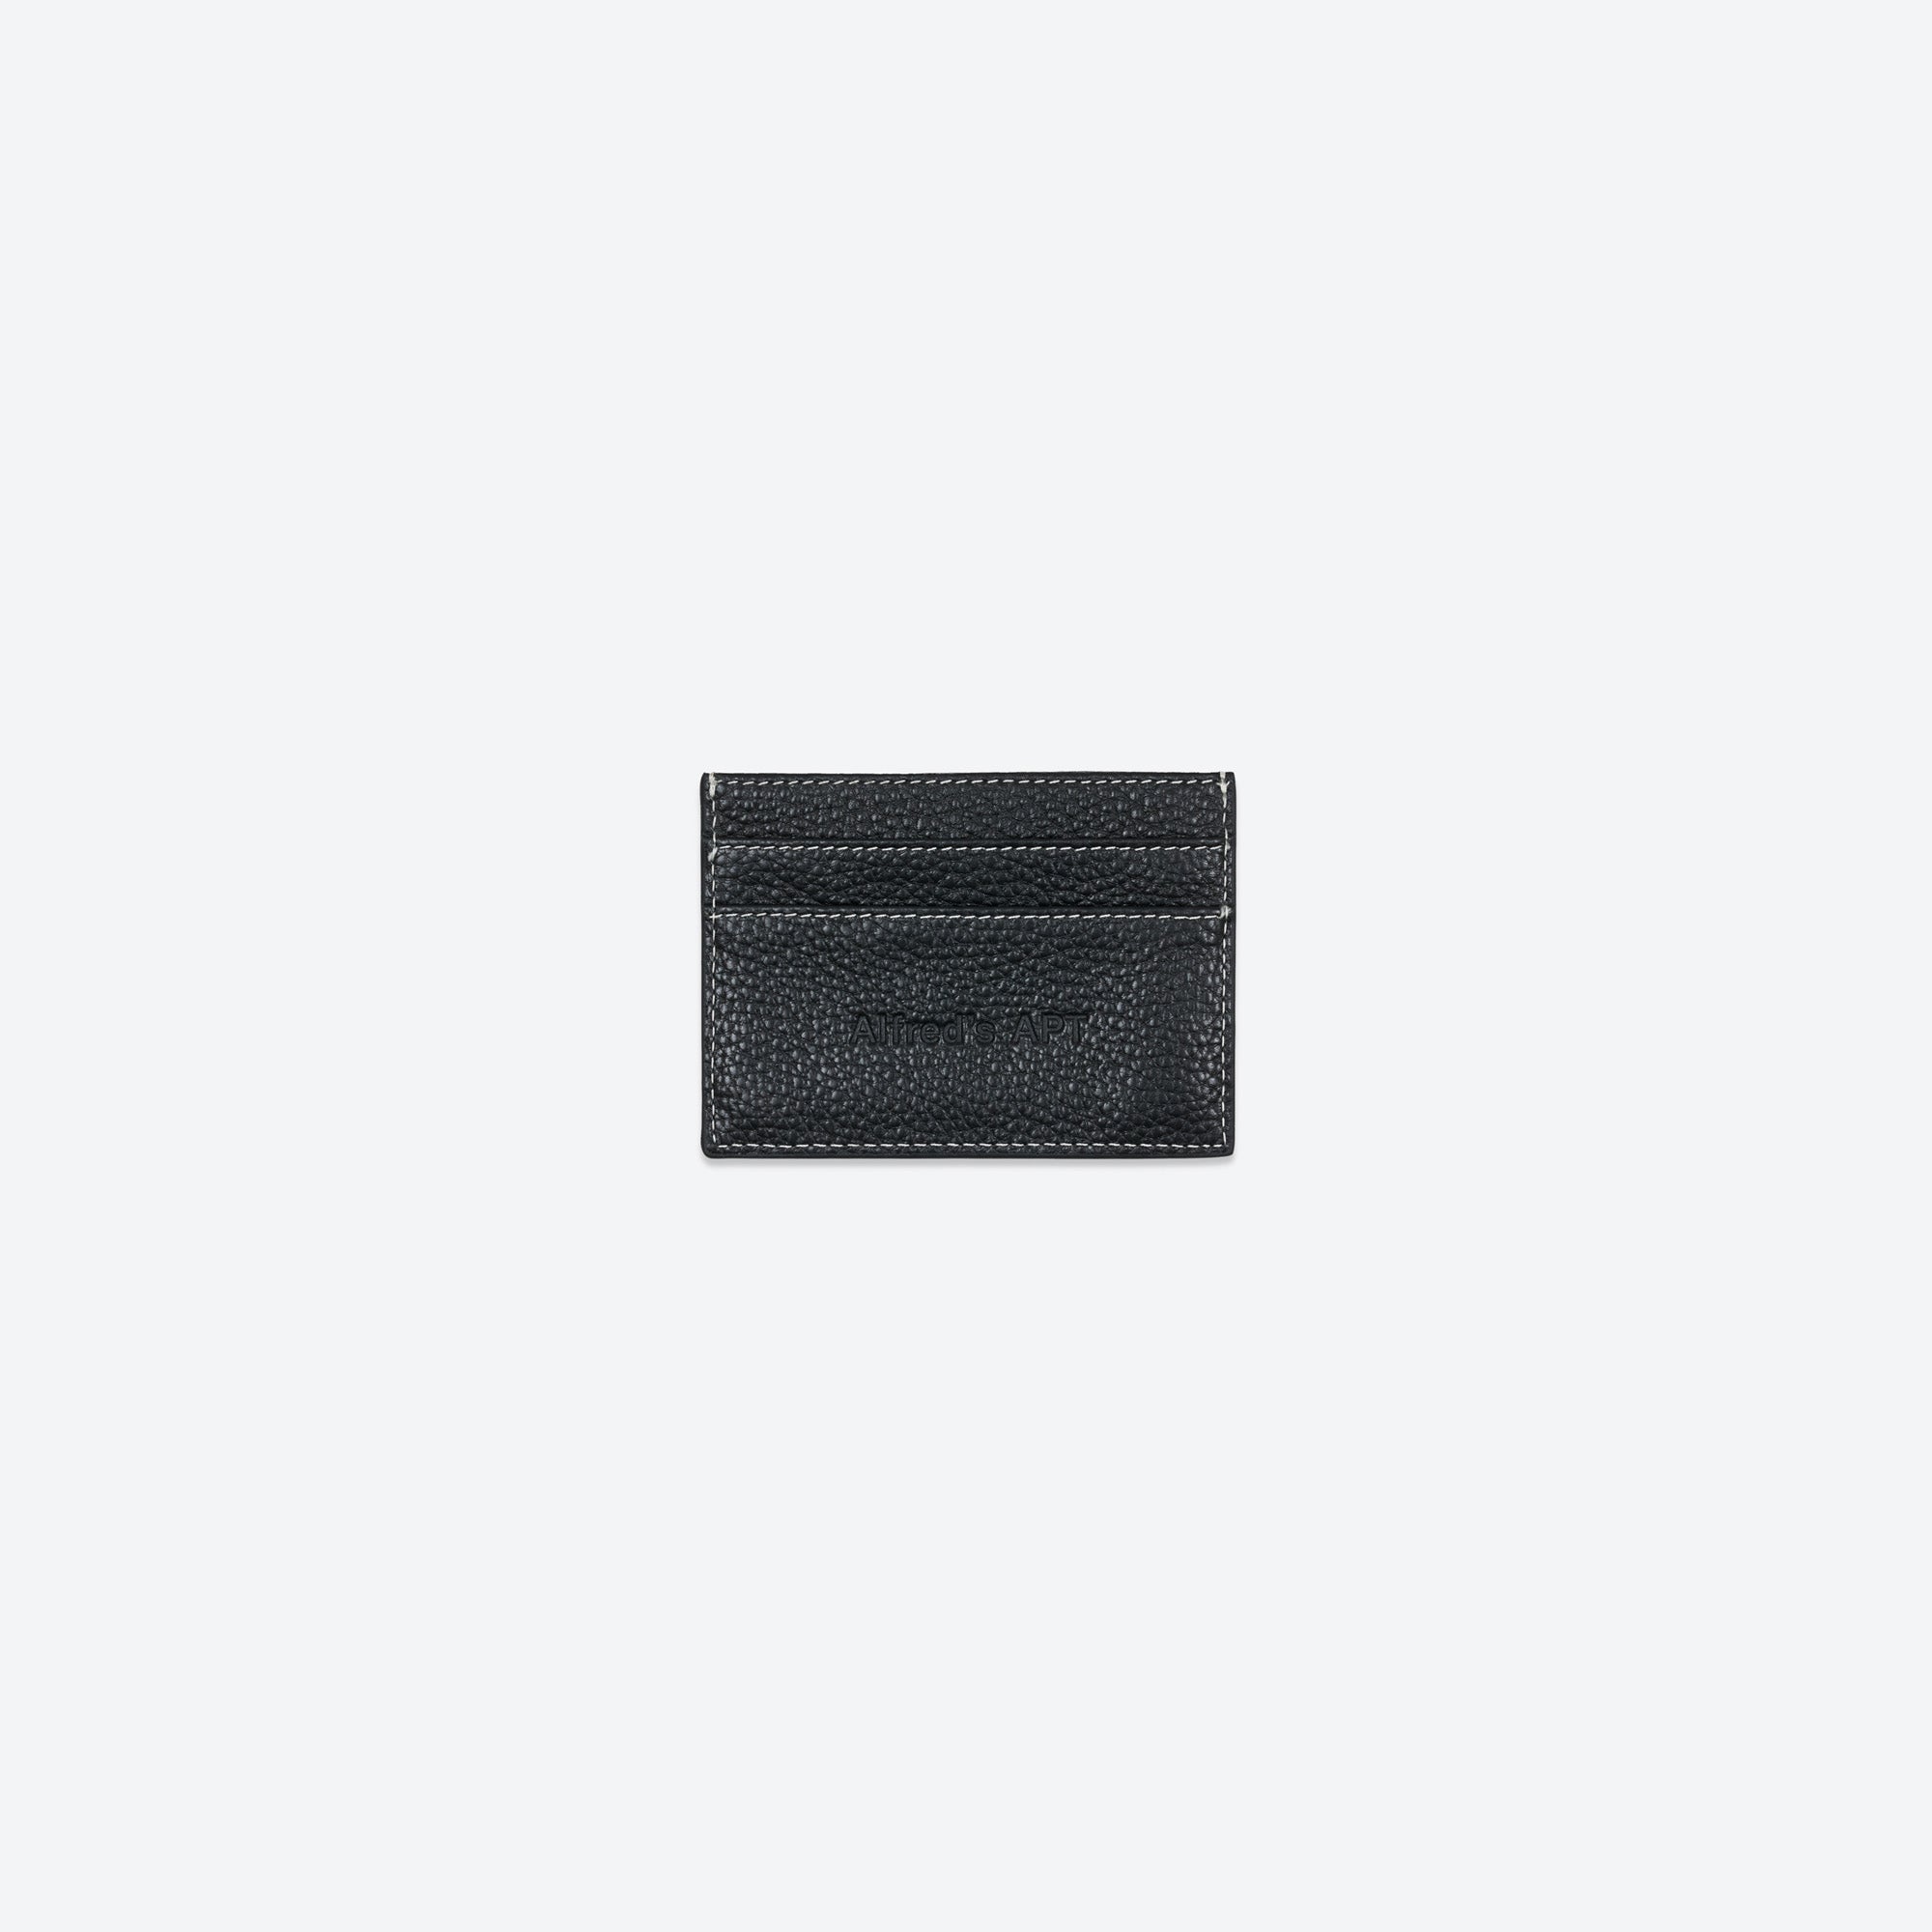 Alfred's Apartment - Native Card Holder - Black